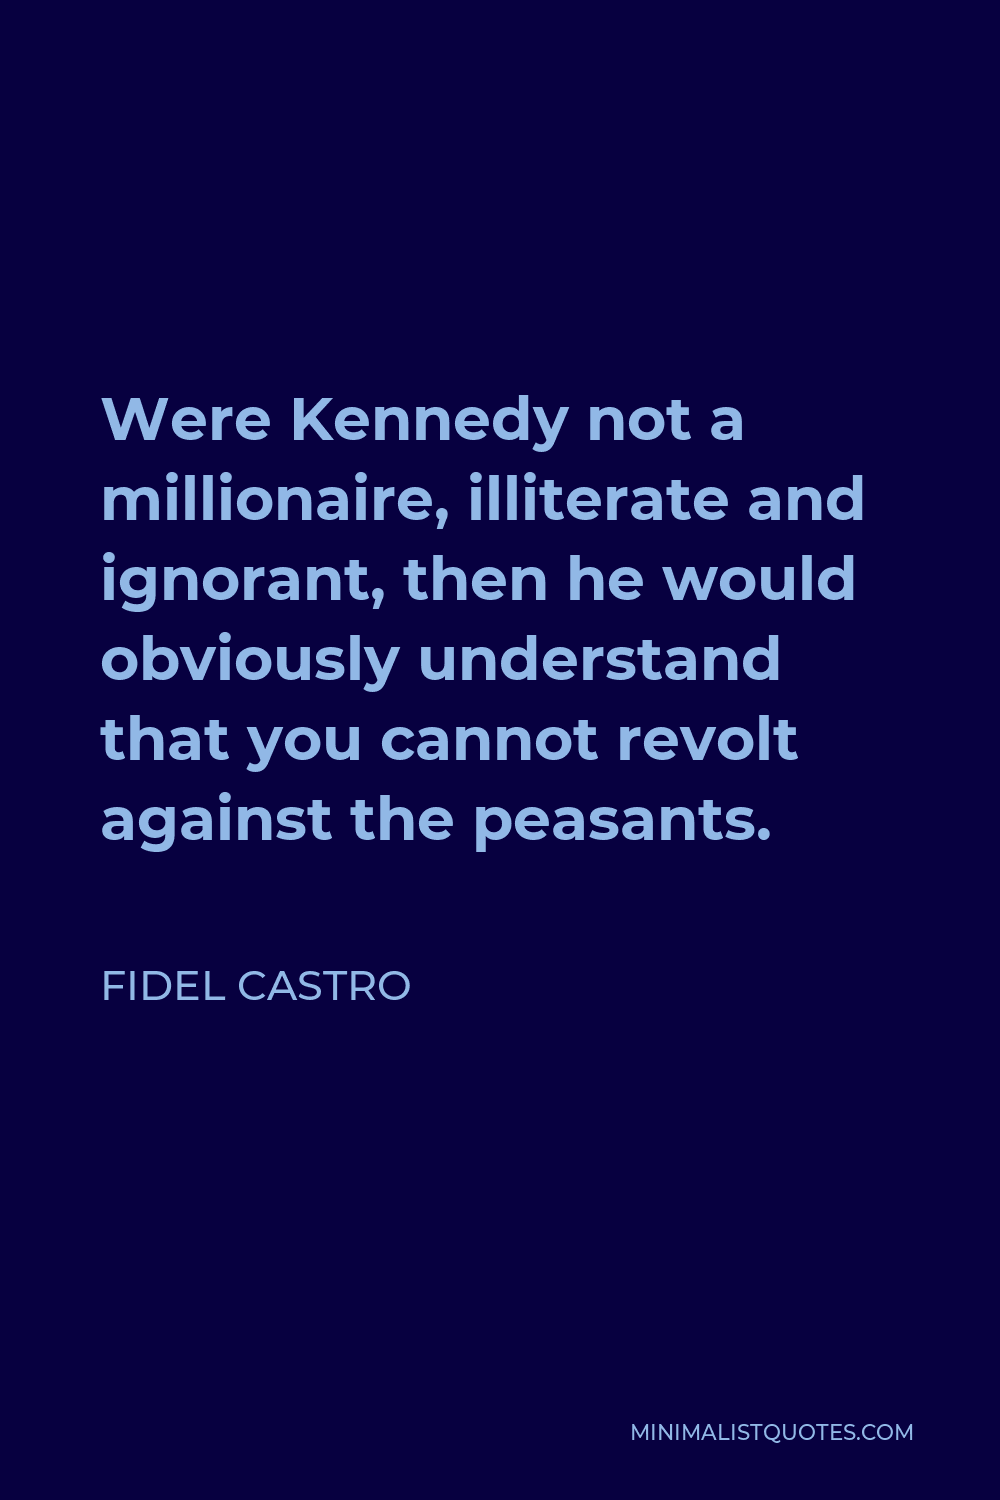 Fidel Castro Quote - Were Kennedy not a millionaire, illiterate and ignorant, then he would obviously understand that you cannot revolt against the peasants.